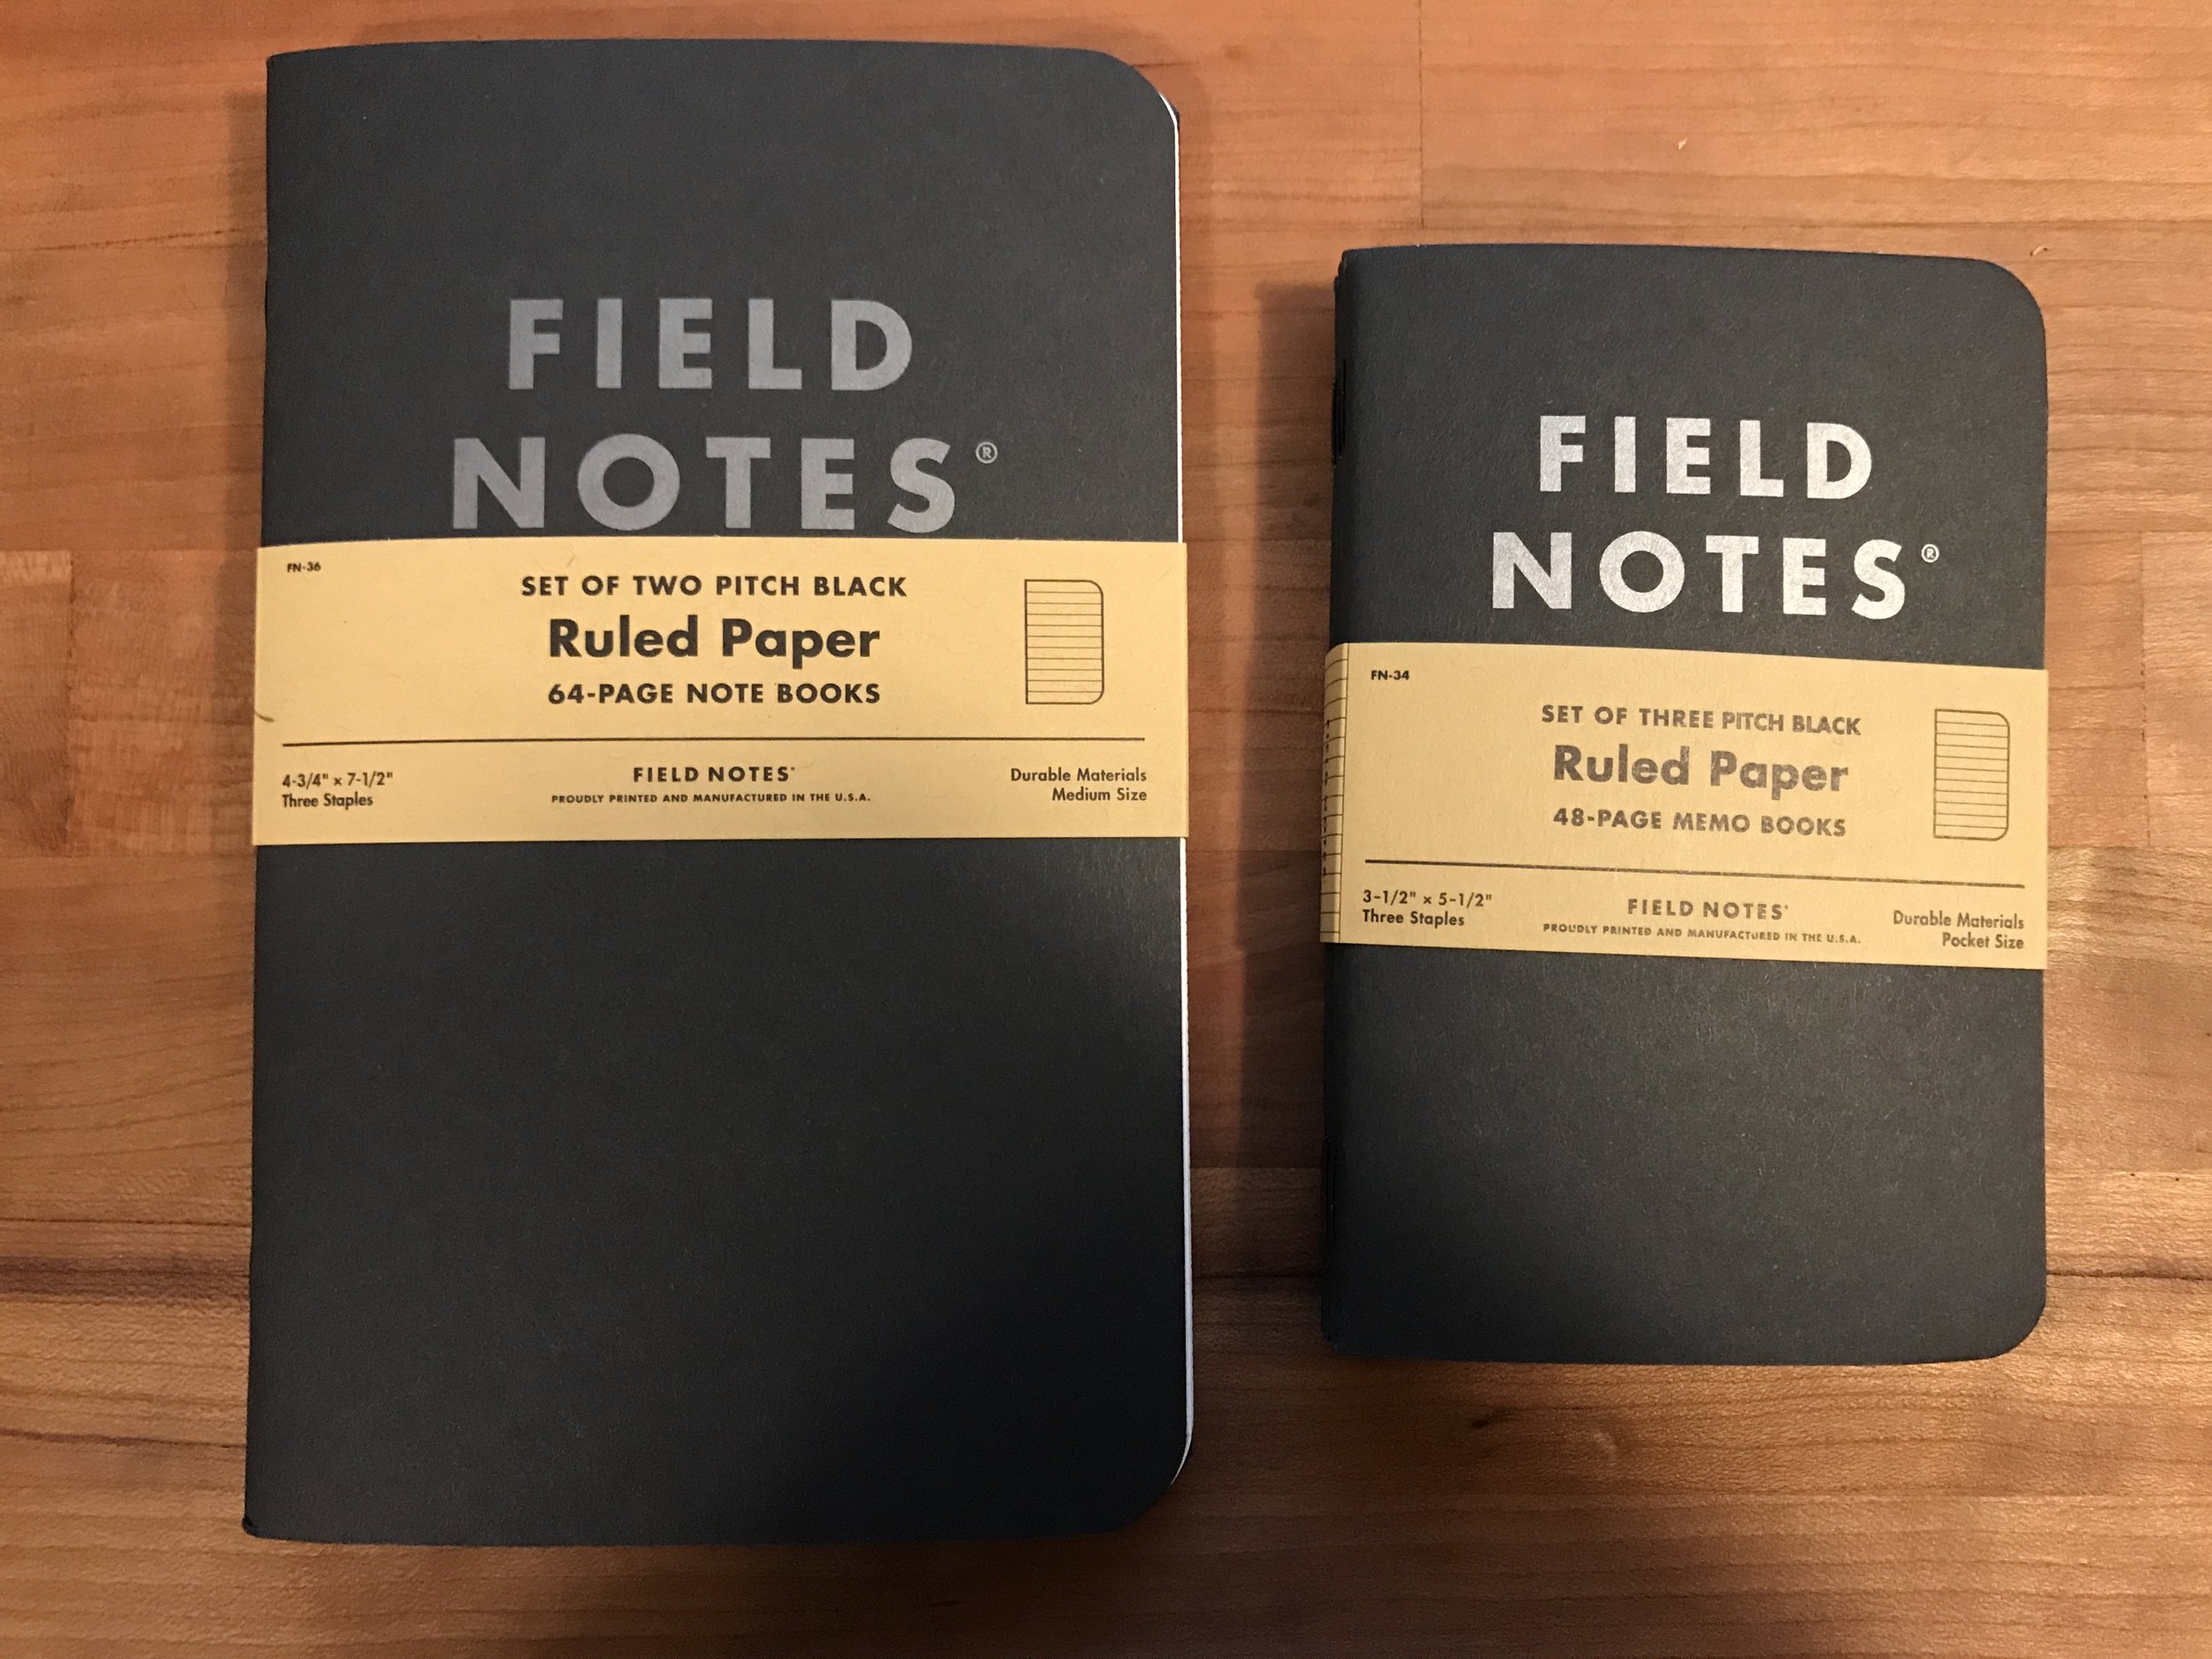 - Ruled Paper 2 Pack FIELD NOTES Black Notebooks 64 Pages Each 4 3/4 X 7 1/2”